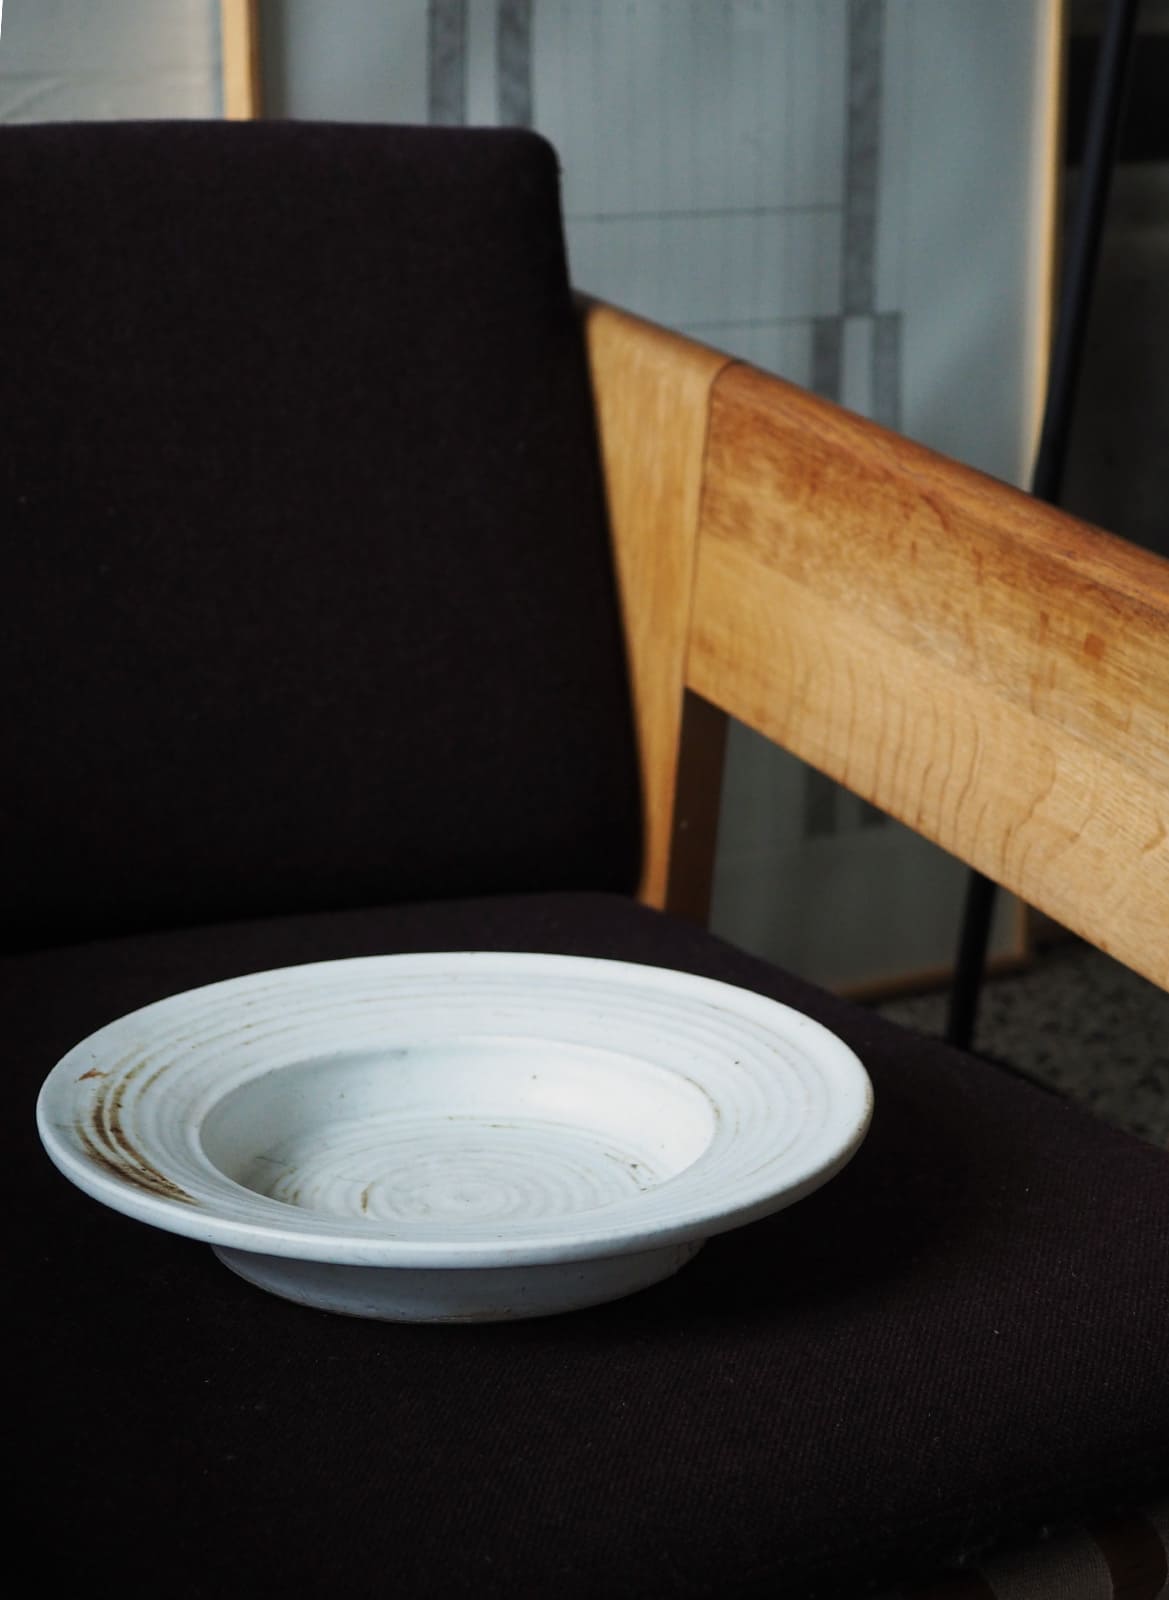 White ceramic dish with brown glaze details standing on a chair